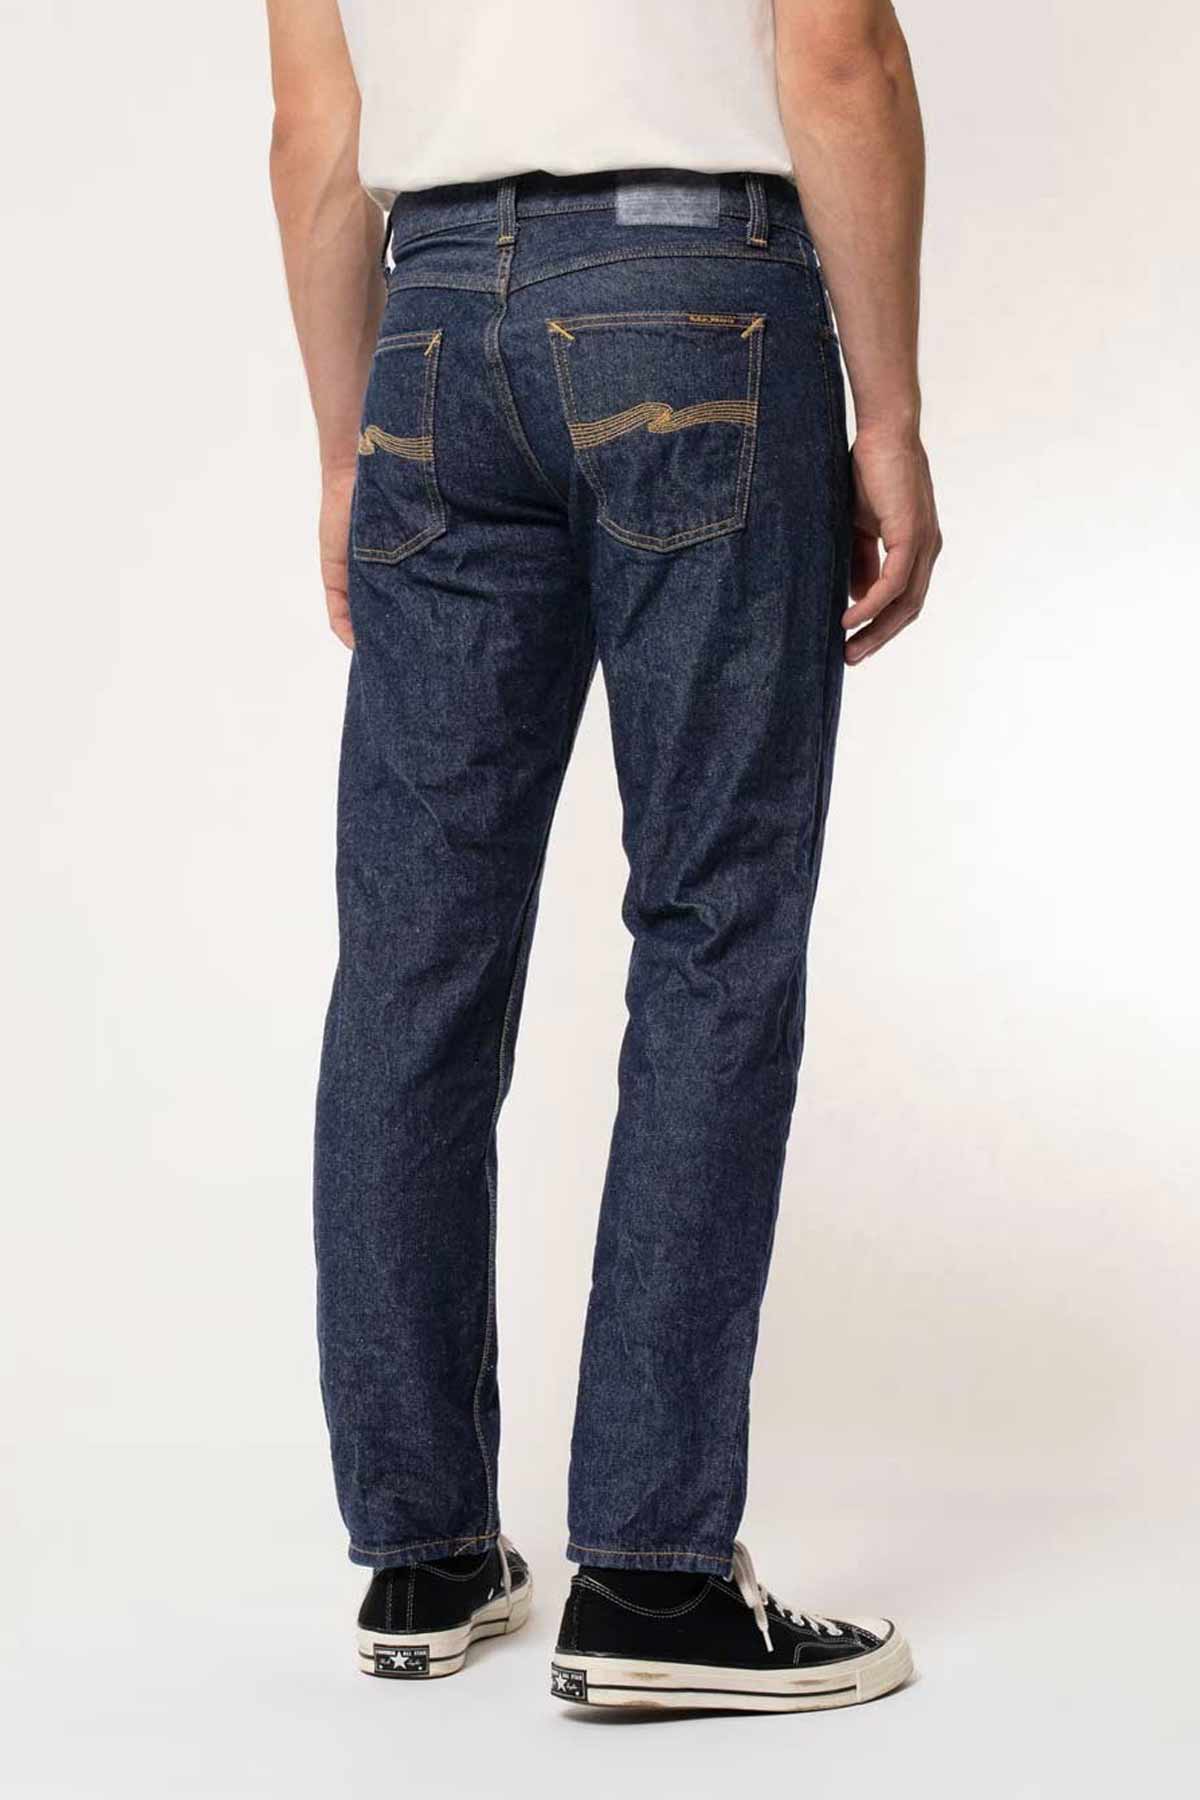 Gritty Jackson - Soaked Neps - Nudie Jeans